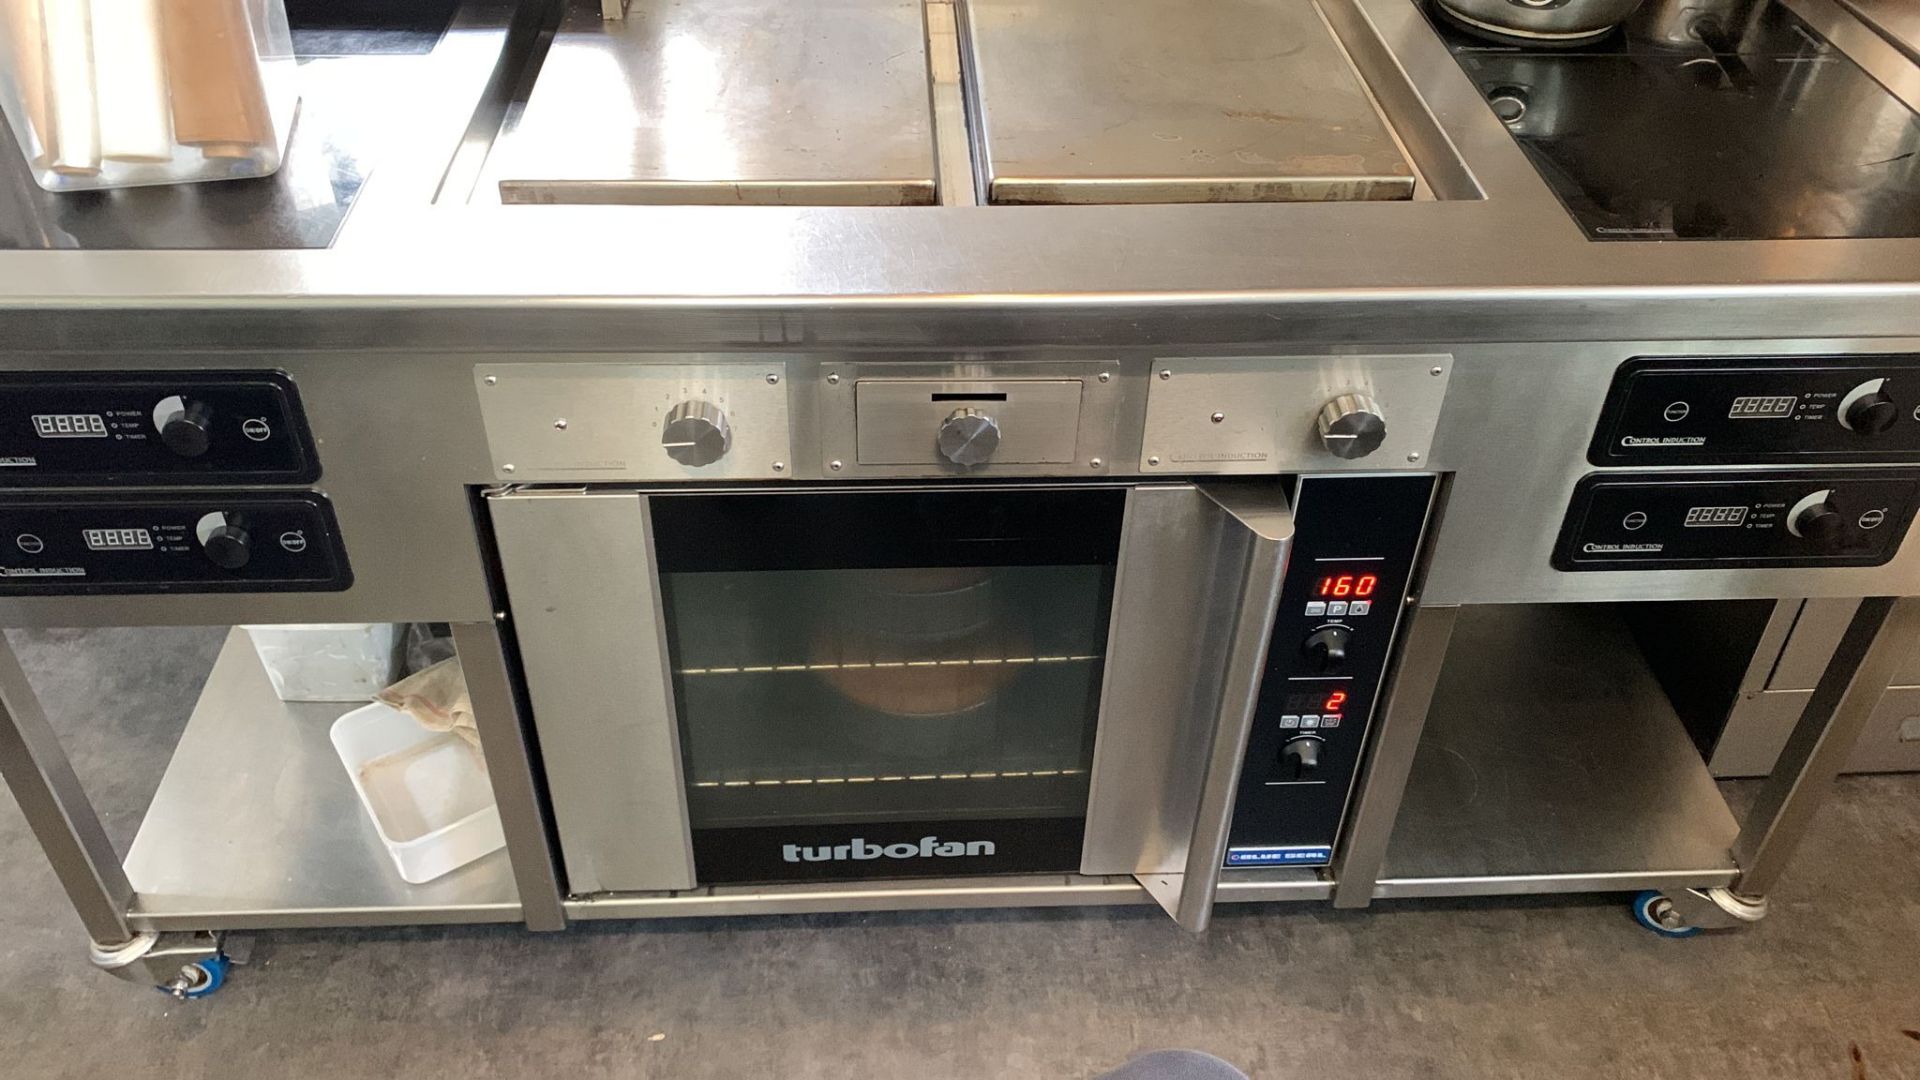 1 x Control Induction Suite 4 x induction hobs 2 x steel plancha, built in Blue Seal turbofan oven